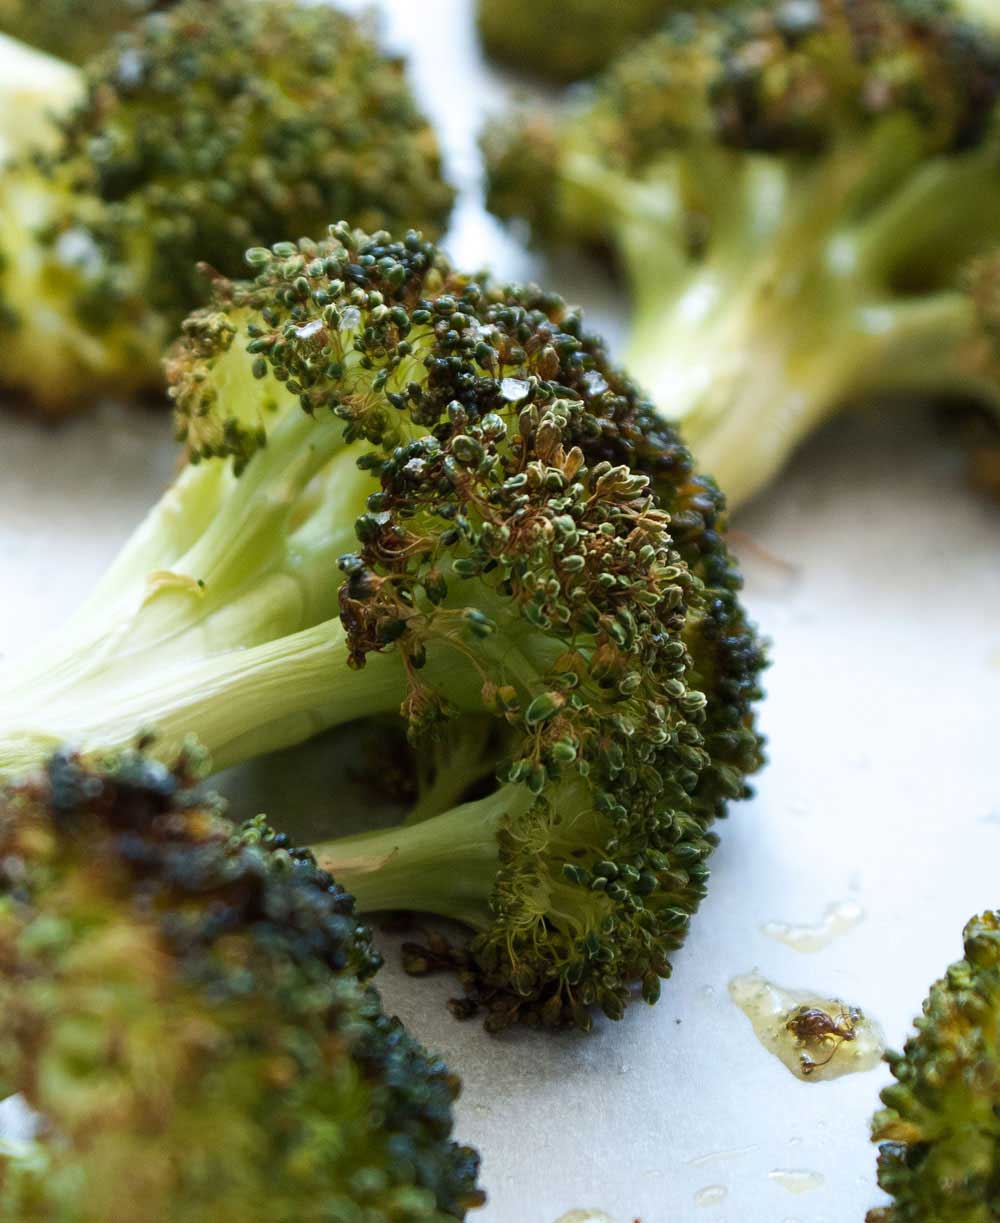 Roasted Broccoli. A delicious ad different way to eat broccoli. Once you eat it roasted you will never go back!